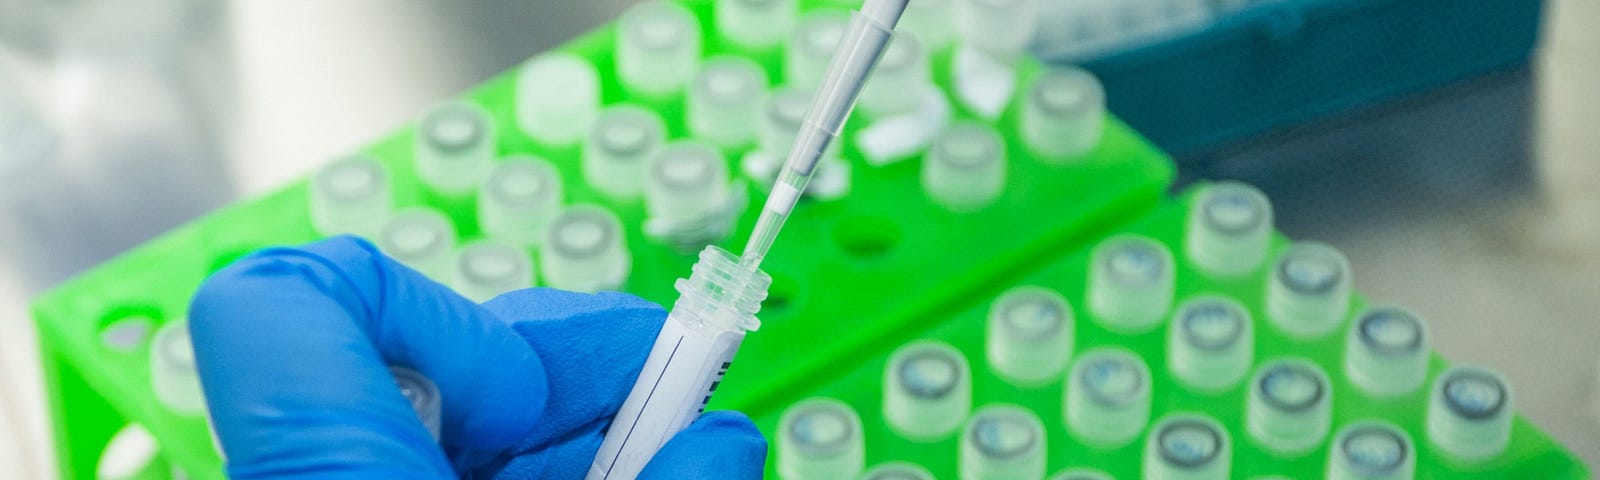 A lab technician uses a single channel pipette dropper to test material during Covid-19 polymerase chain reaction (PCR) test processing at a laboratory in the Dunkeld suburb of Johannesburg, South Africa, on Wednesday, Feb. 10, 2021. Scientists are concerned the South Africa coronavirus strain could be far more widespread in the U.K. than test results show, threatening plans to start lifting lockdown once vaccines have been deployed. Photographer: Waldo Swiegers/Bloomberg